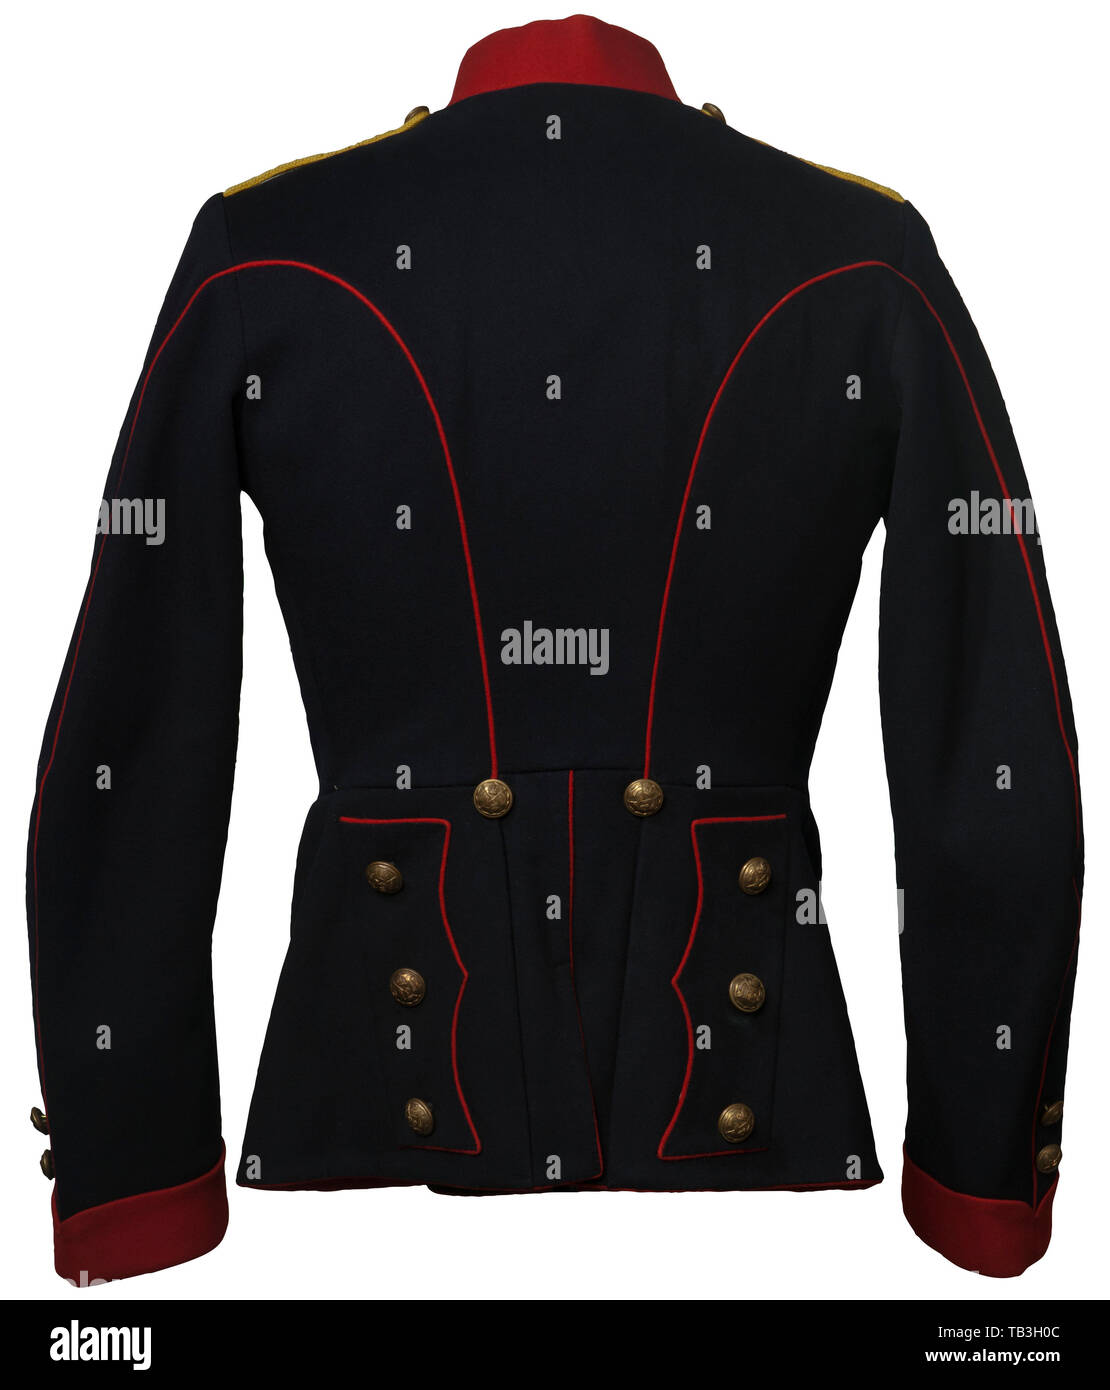 An English enlisted lancer's uniform for an individual in the 12th Lancer Regiment, Tunic of black cotton material with red piping on arms and back, red cotton collar with regimental insignia, yellow cord sewn in shoulder boards with 12th lancer buttons, gold regimental buttons, red parade rabatte, white cotton lining in tunic and black silk collar lining. 1914 dated. USA-lot. historic, historical 20th century, Additional-Rights-Clearance-Info-Not-Available Stock Photo